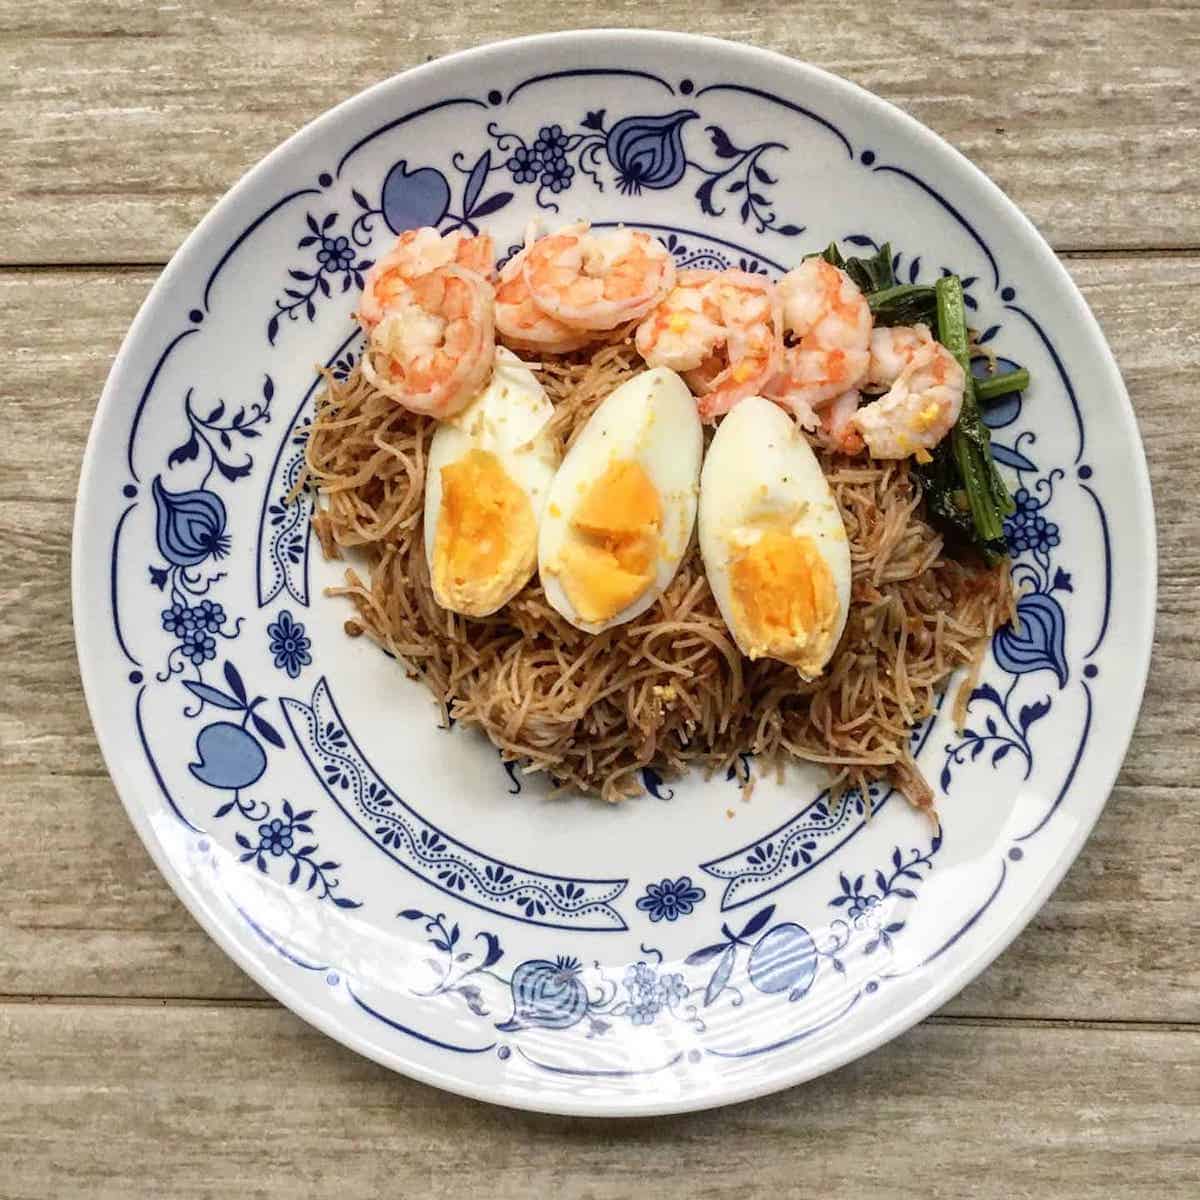 Dry mee siam with prawns and hard boiled egg